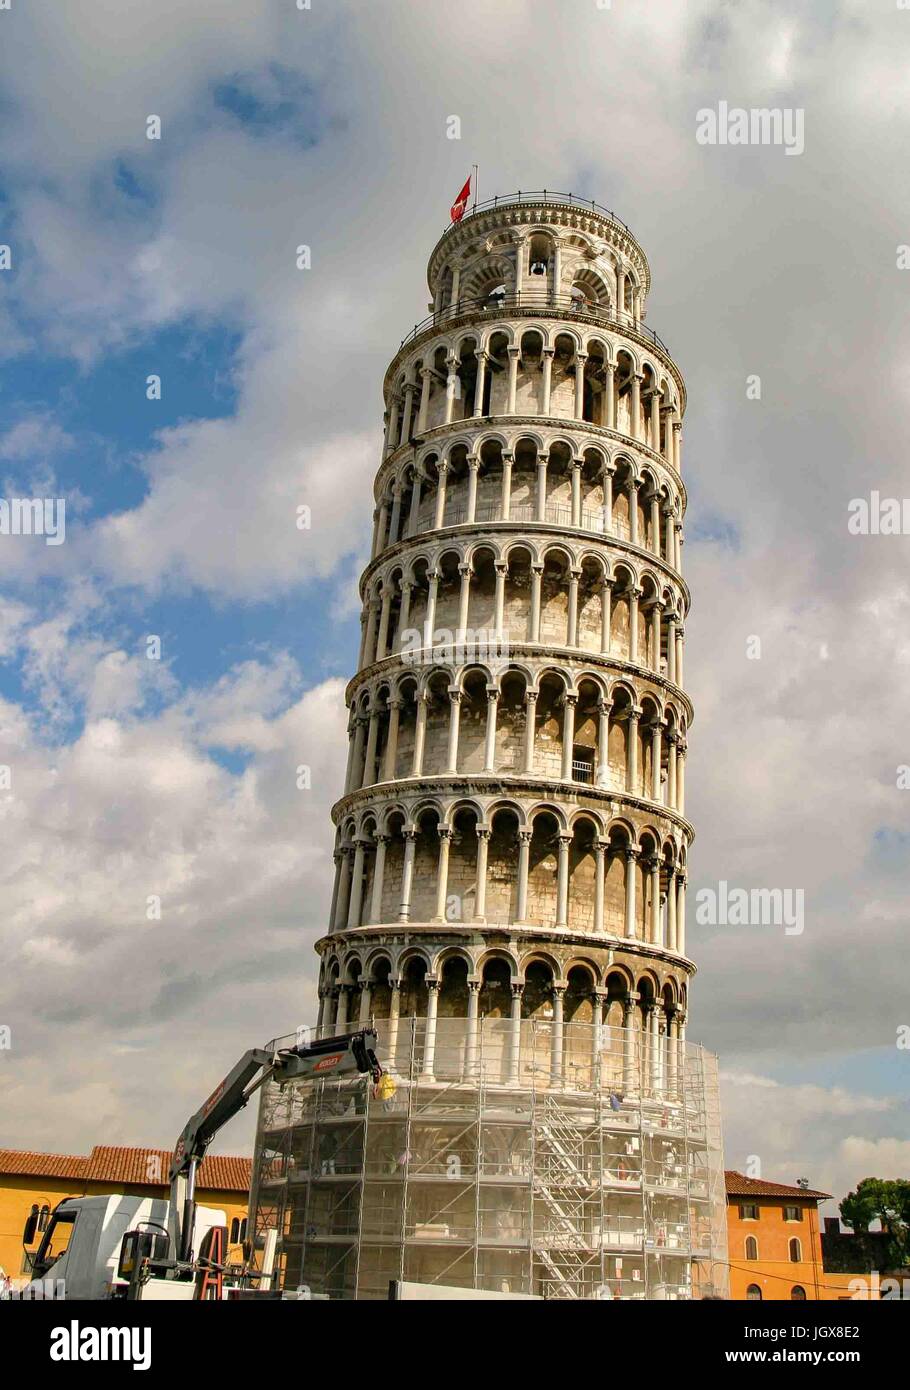 Pisa, Italy. 15th Oct, 2004. The famous medieval Leaning Tower of Pisa Is known worldwide for its unintended tilt. On the historic Piazza dei Miracoli (Square of Miracles), a UNESCO Word Heritage Site, it is the freestanding bell tower (campanile) of the Cathedral of Pisa and a favorite international tourist destination. In this photo the meshwork around the base is because of adjustments being made to the lean of the tower. Credit: Arnold Drapkin/ZUMA Wire/Alamy Live News Stock Photo